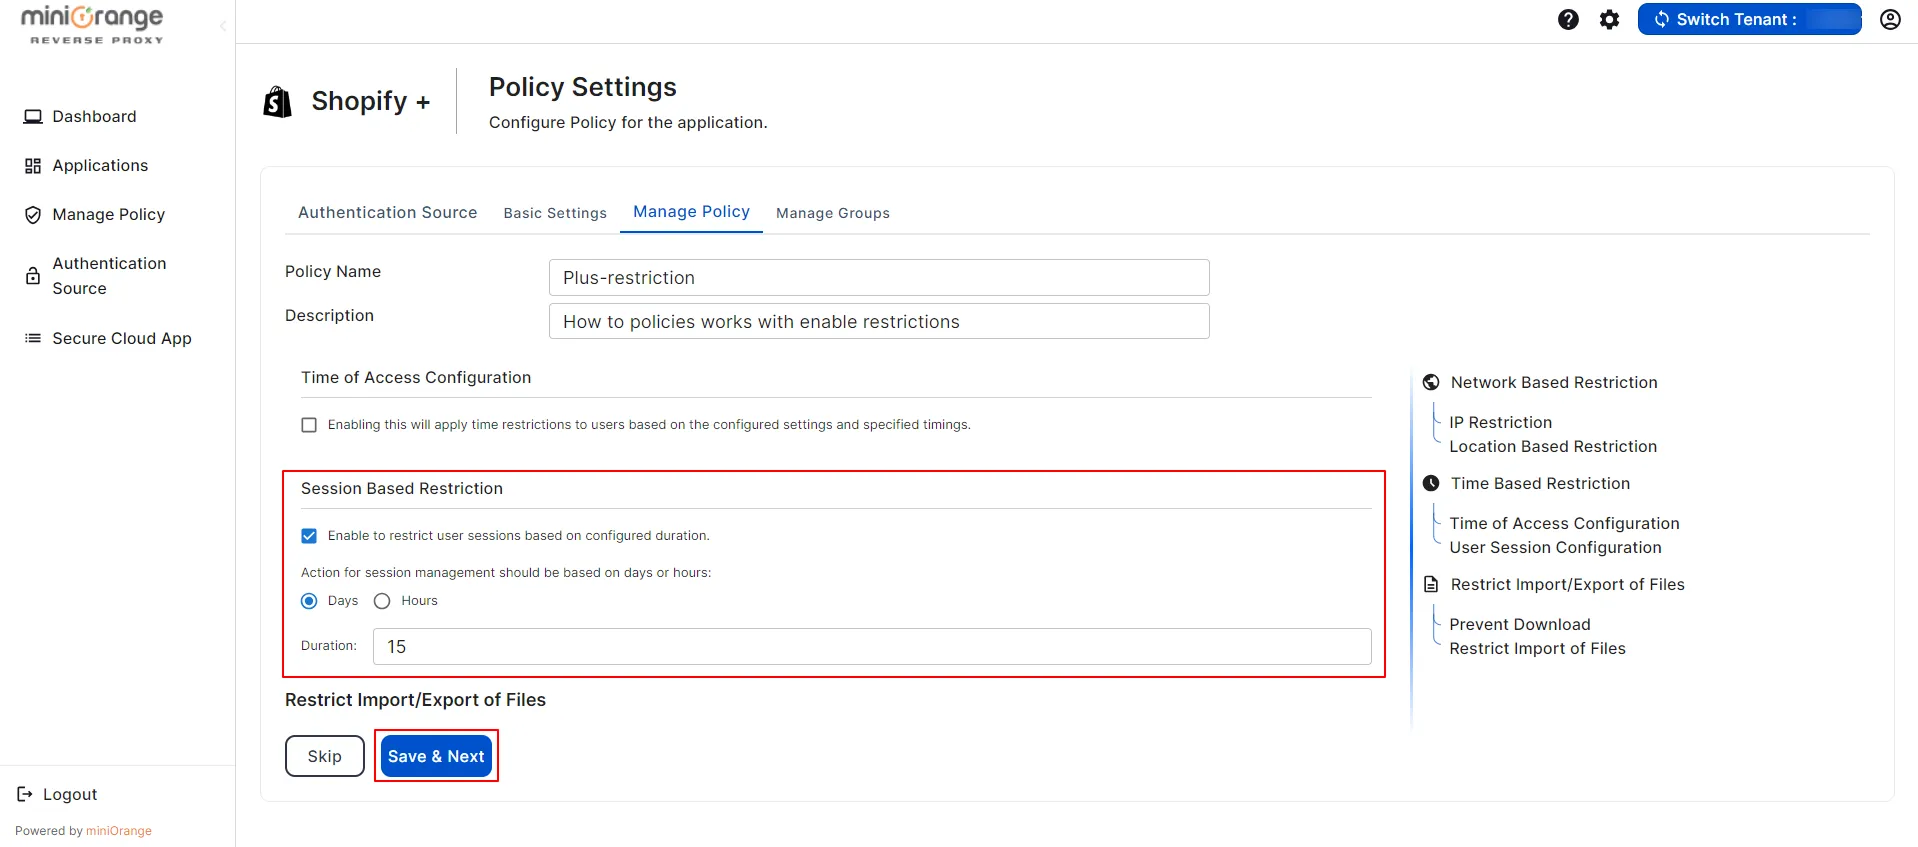 shopify plus CASB policies Enable Session Restriction